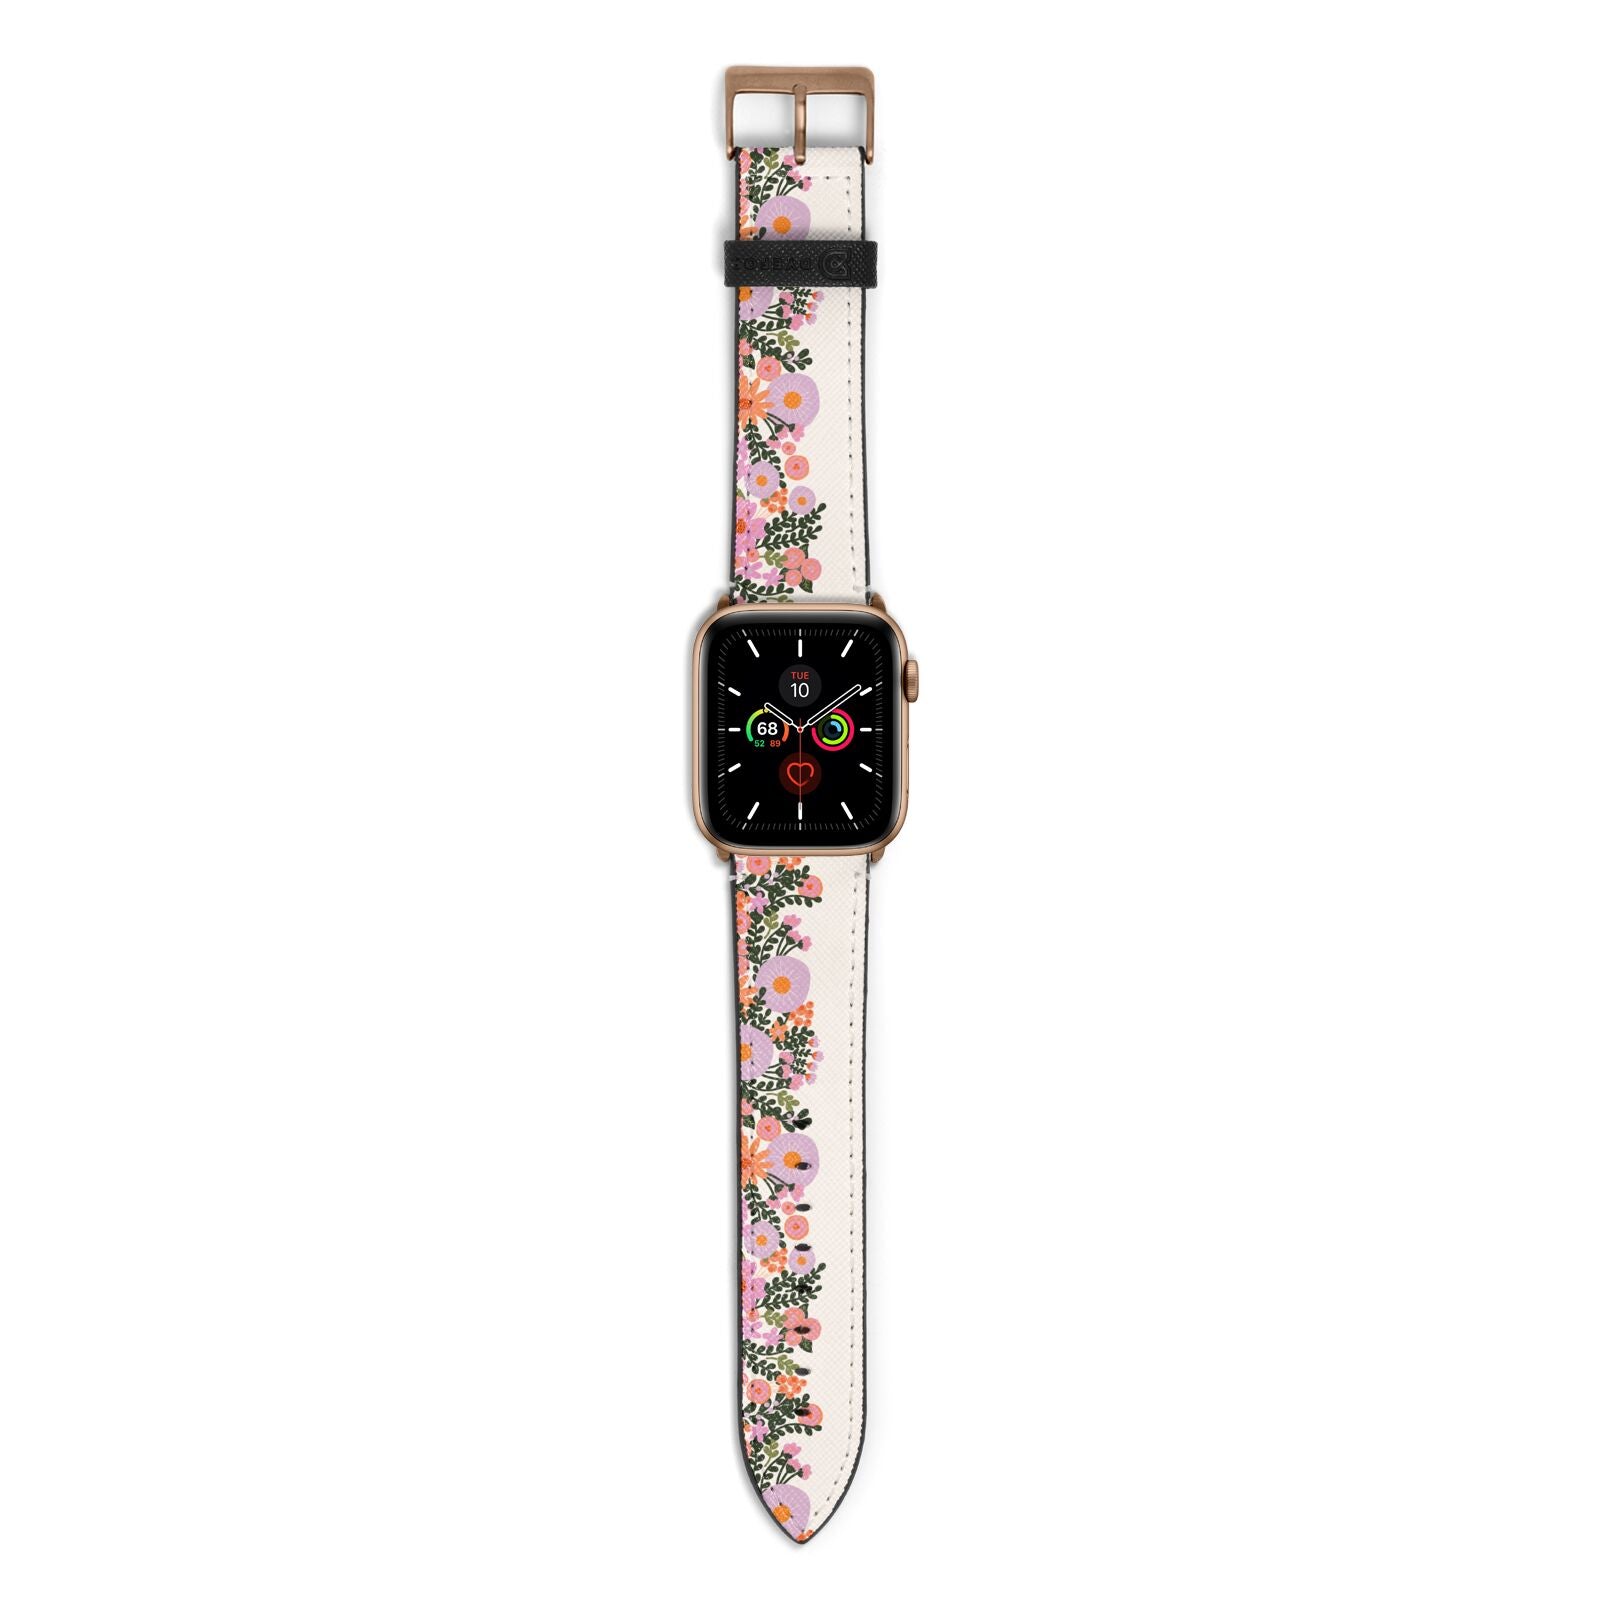 Floral Banner Pattern Apple Watch Strap with Gold Hardware